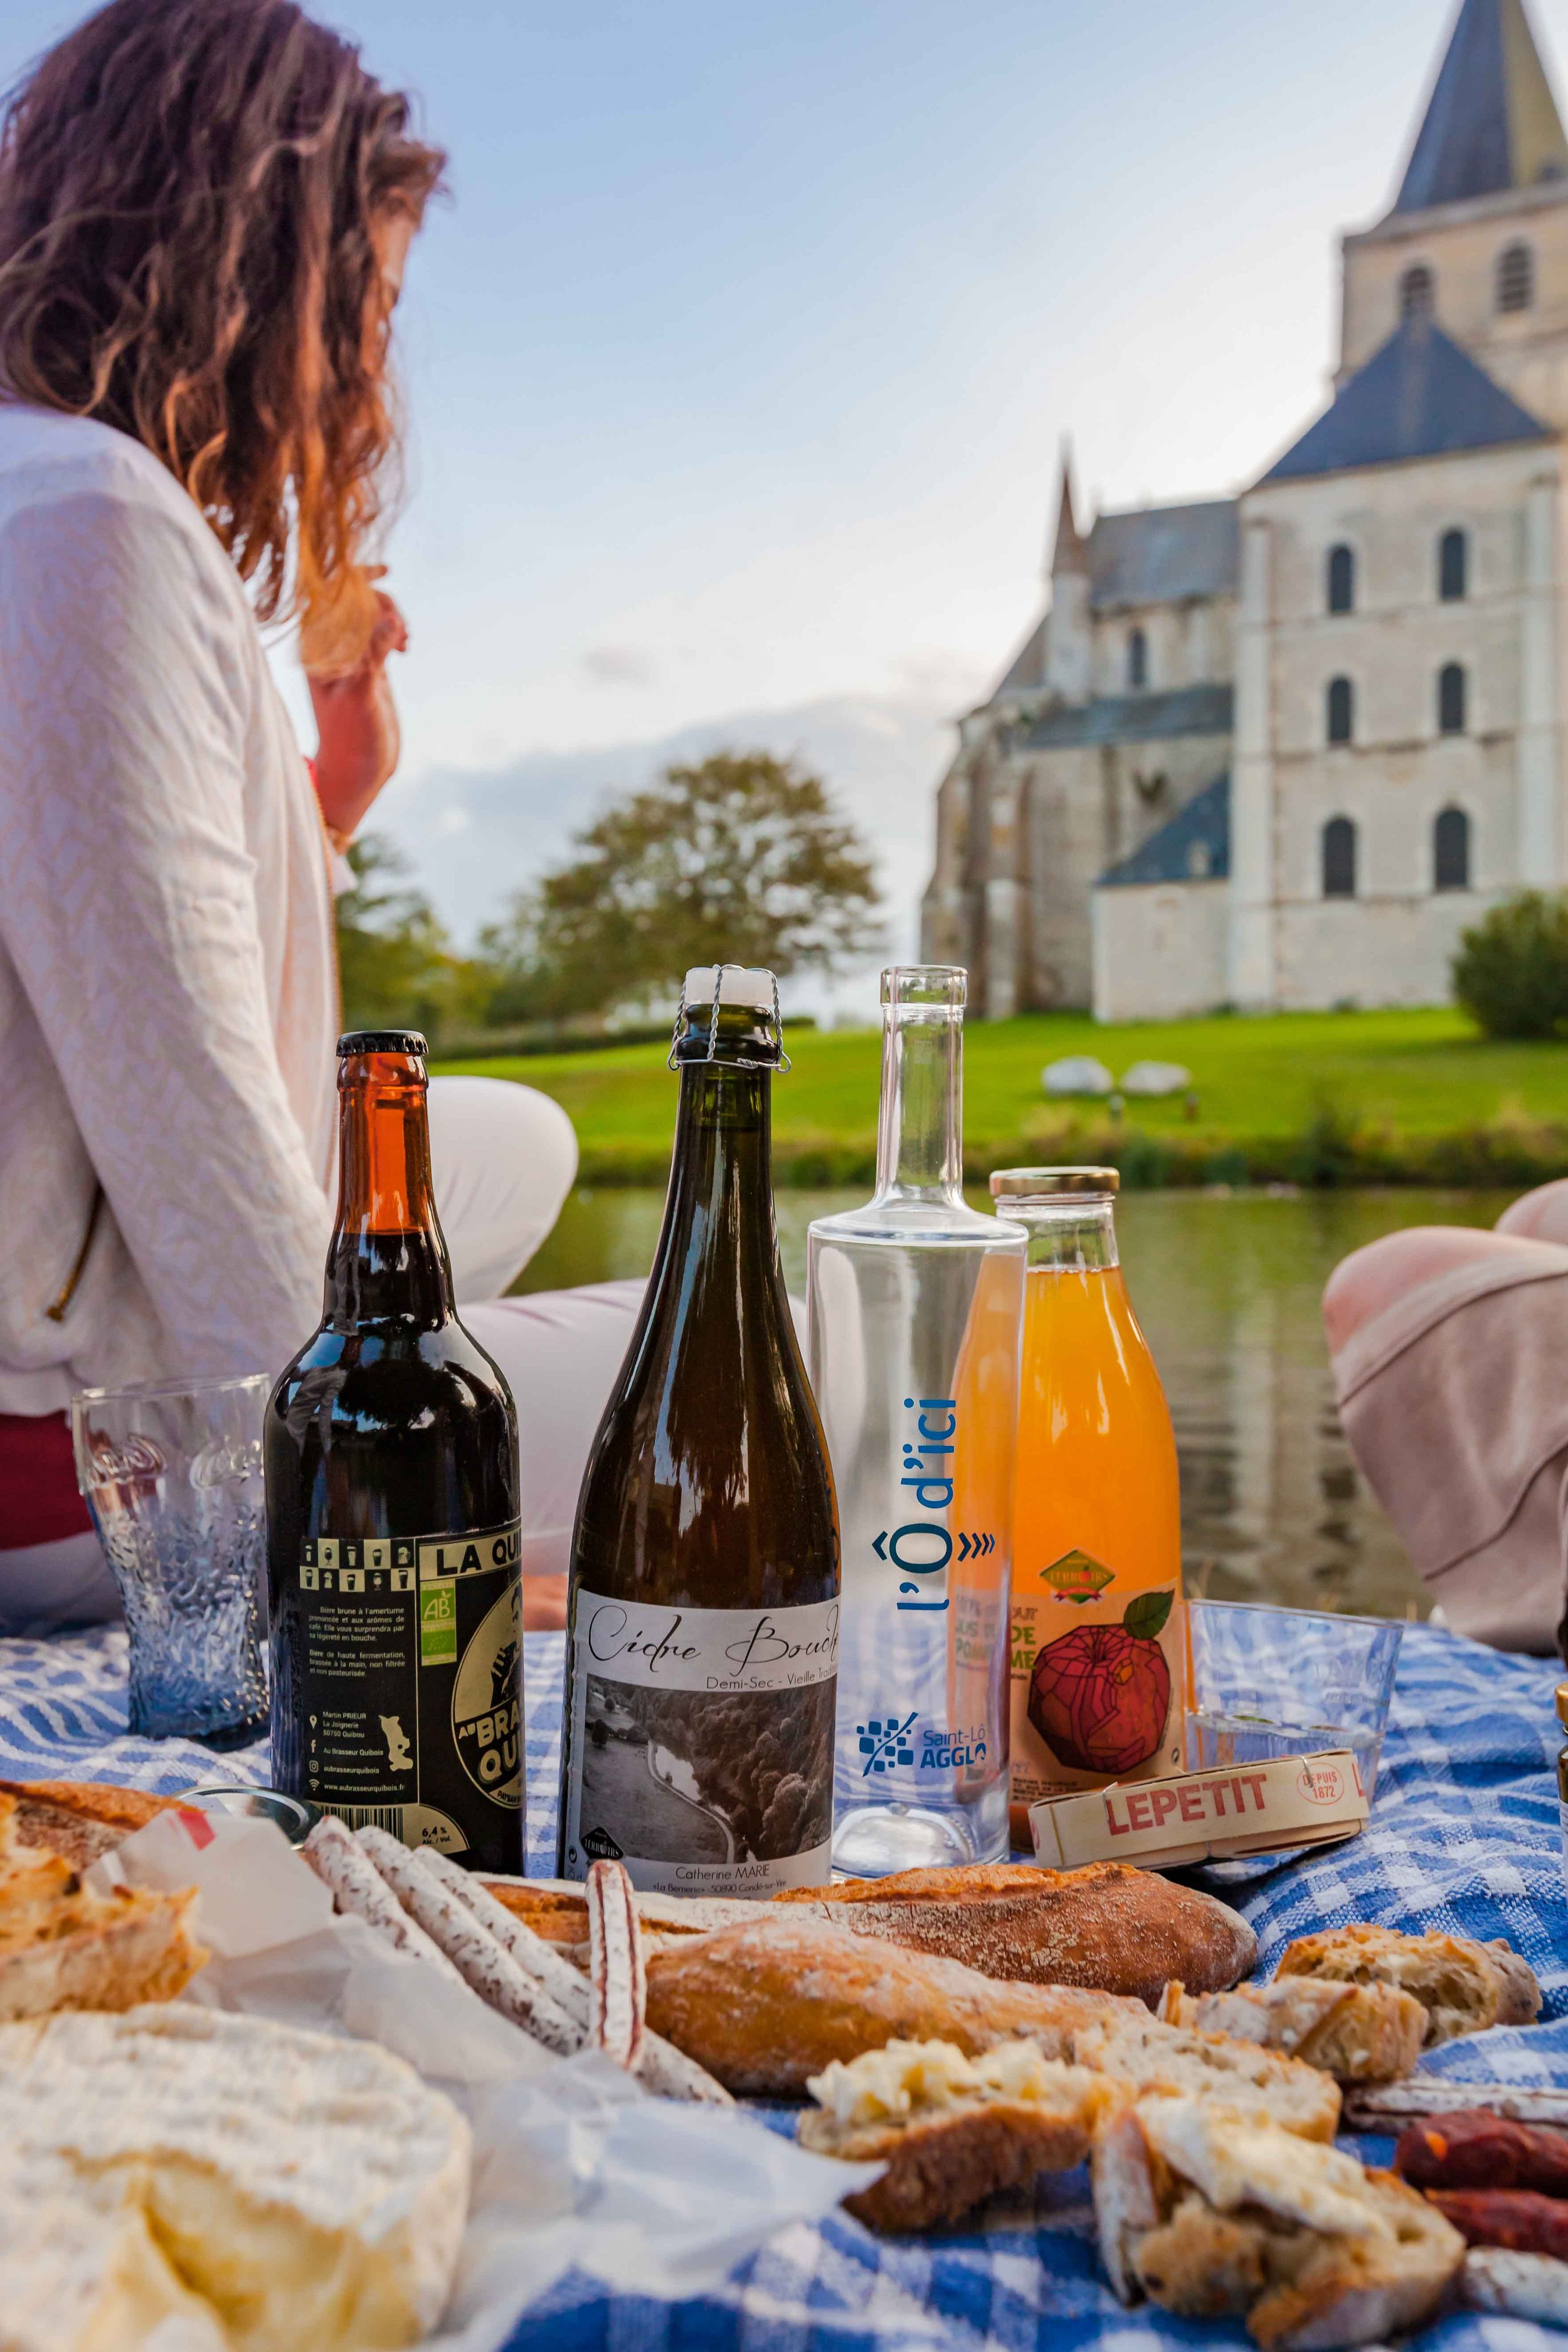 A woman sits on a blanket with food and drinks in front of a French chateau.